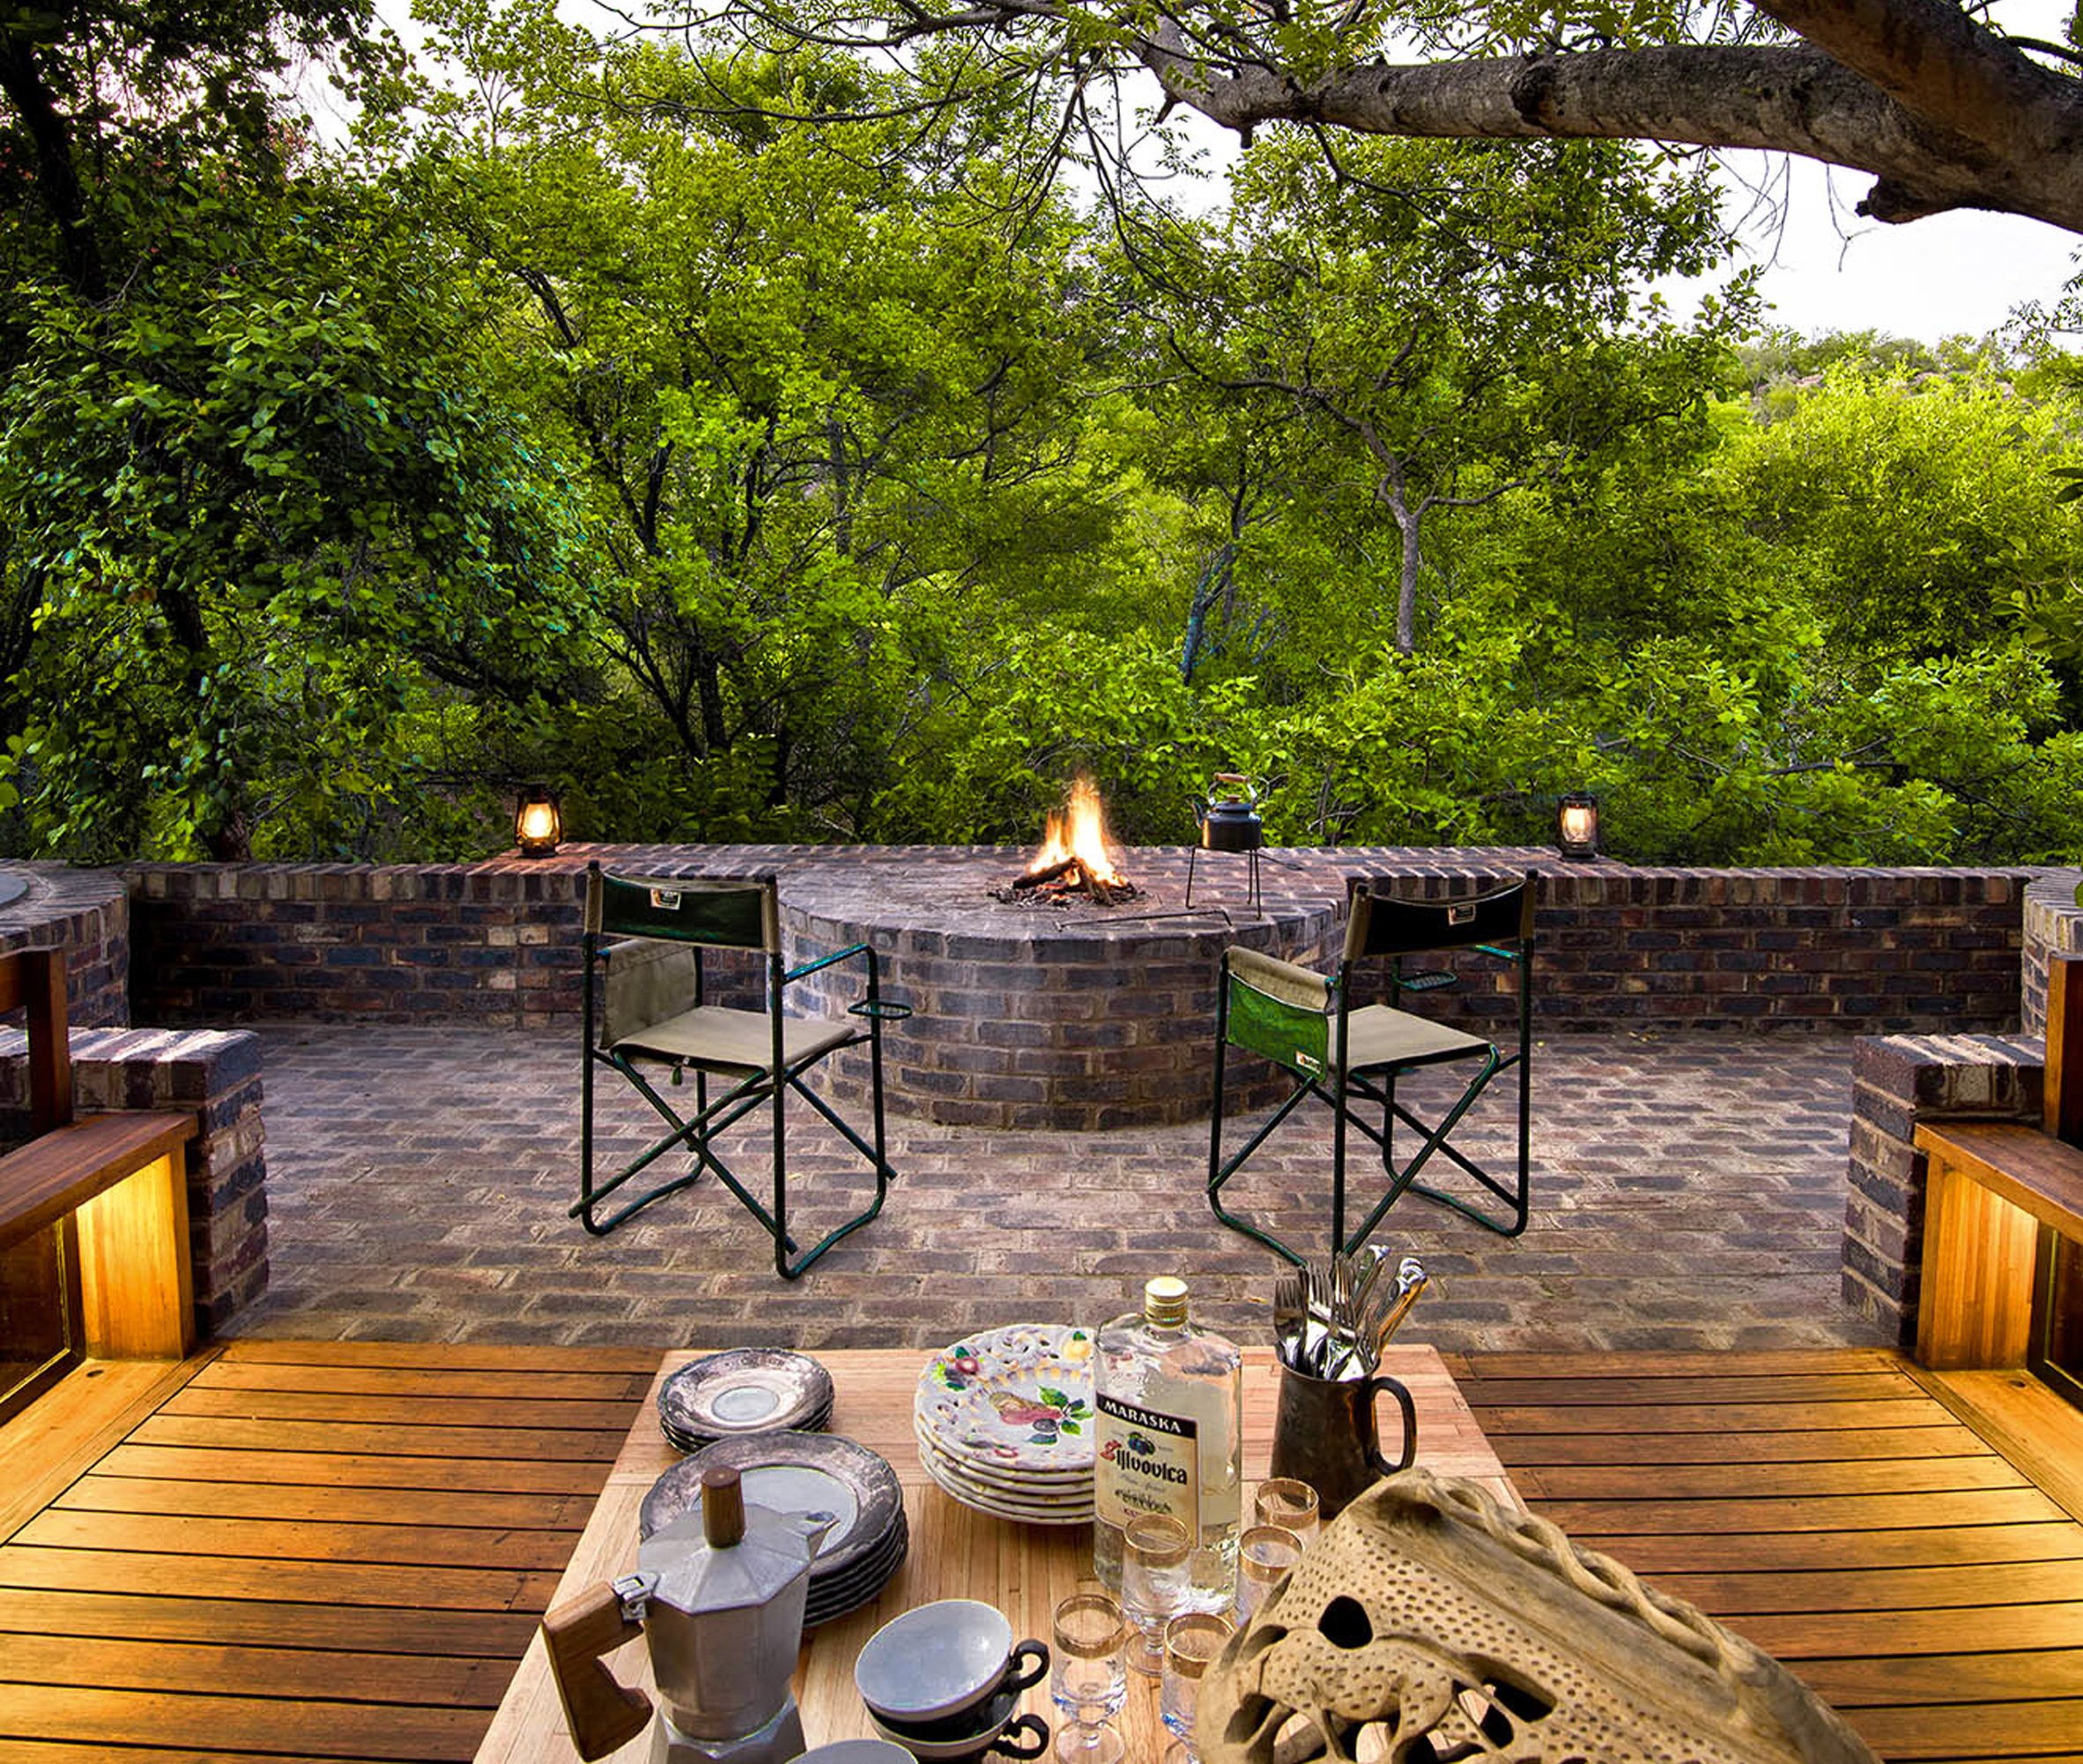 Outdoor Spaces With Warming Fireplaces, Outdoor Fireplaces For Wood Decks